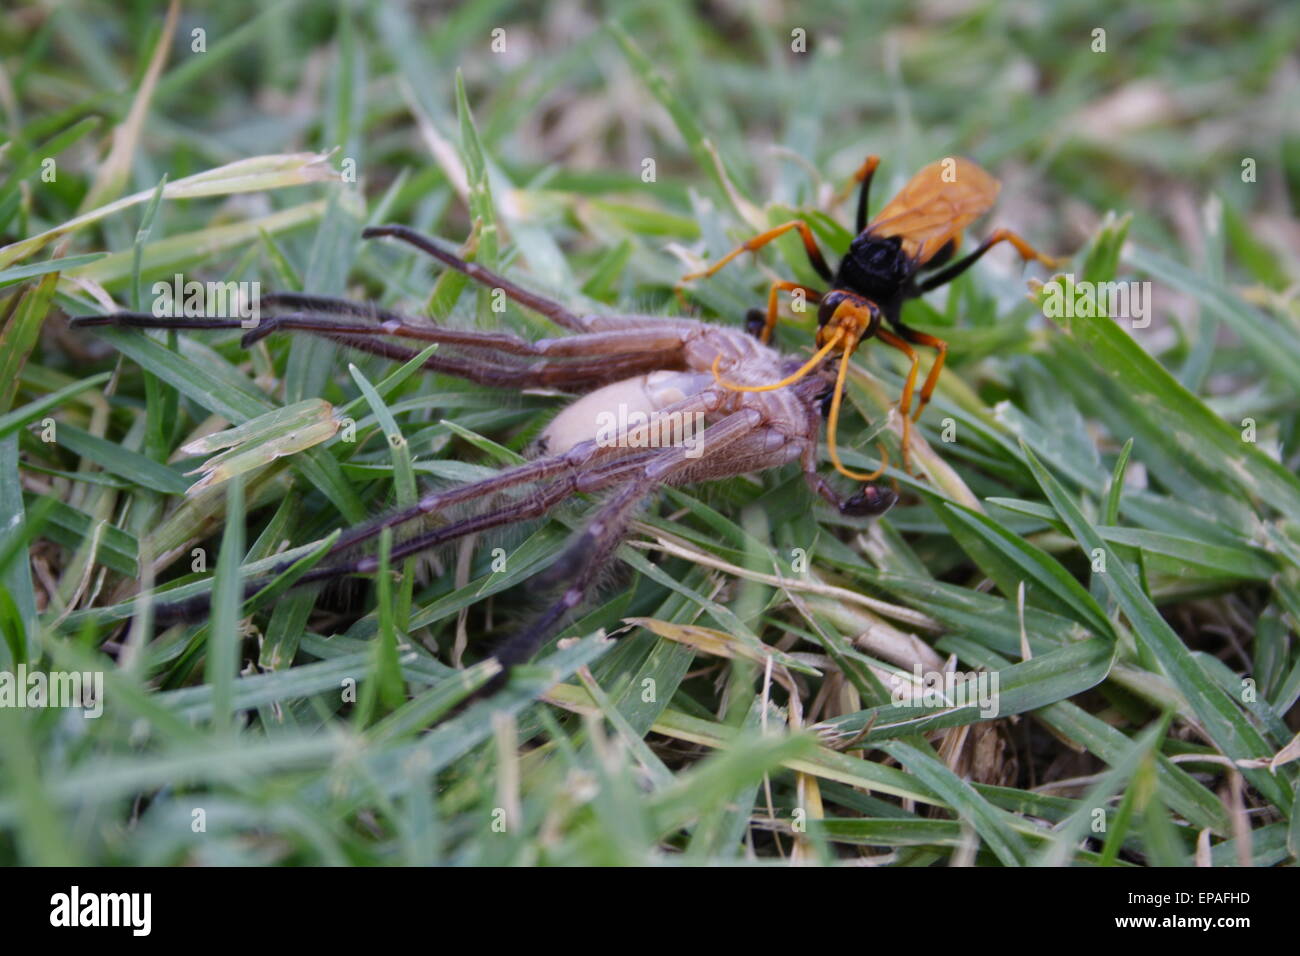 Wasp dragging a paralysed spider back to its den, where it will feed its young. Australia. Stock Photo